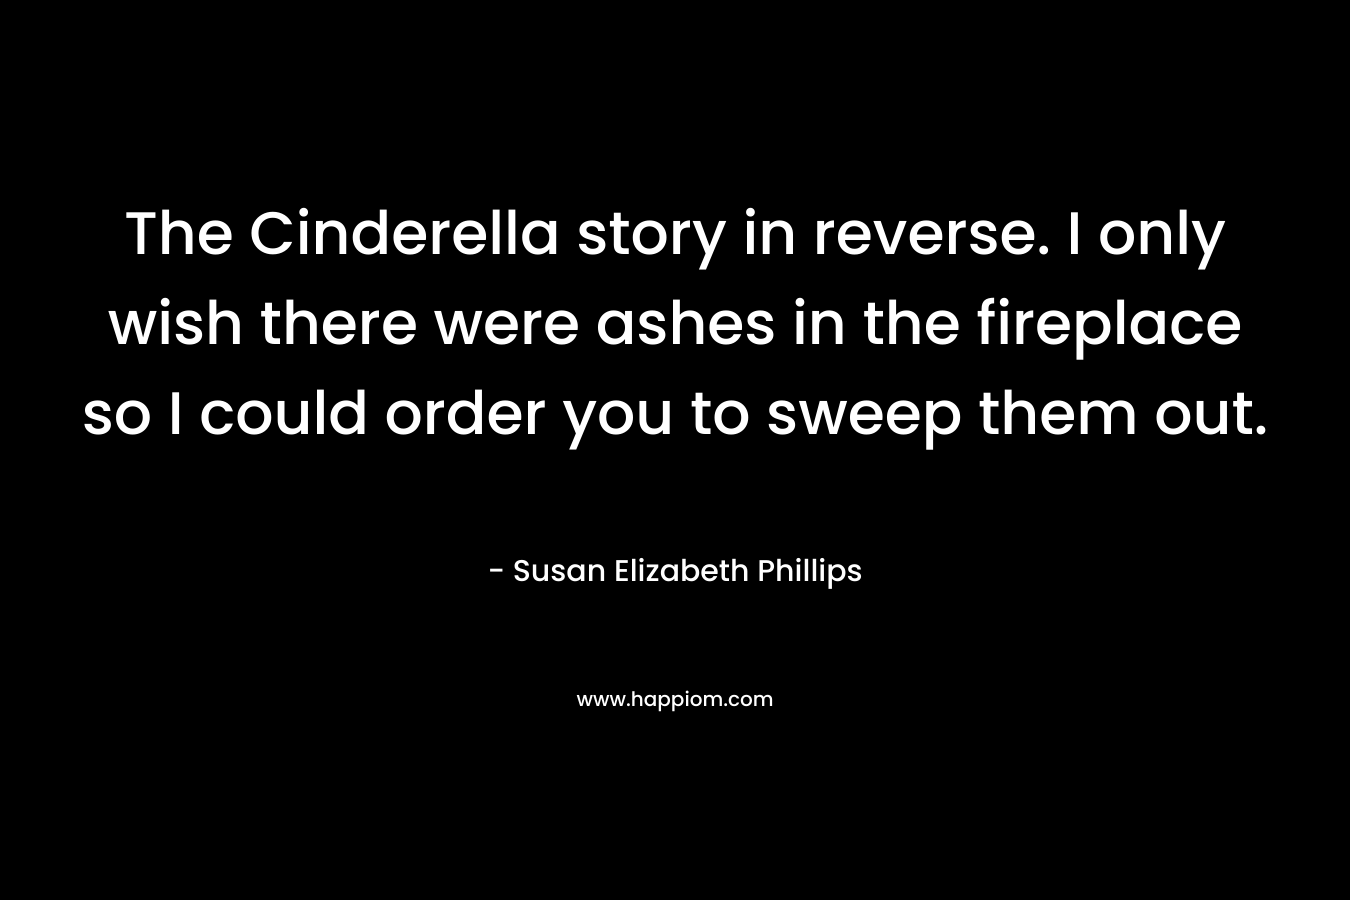 The Cinderella story in reverse. I only wish there were ashes in the fireplace so I could order you to sweep them out. – Susan Elizabeth Phillips